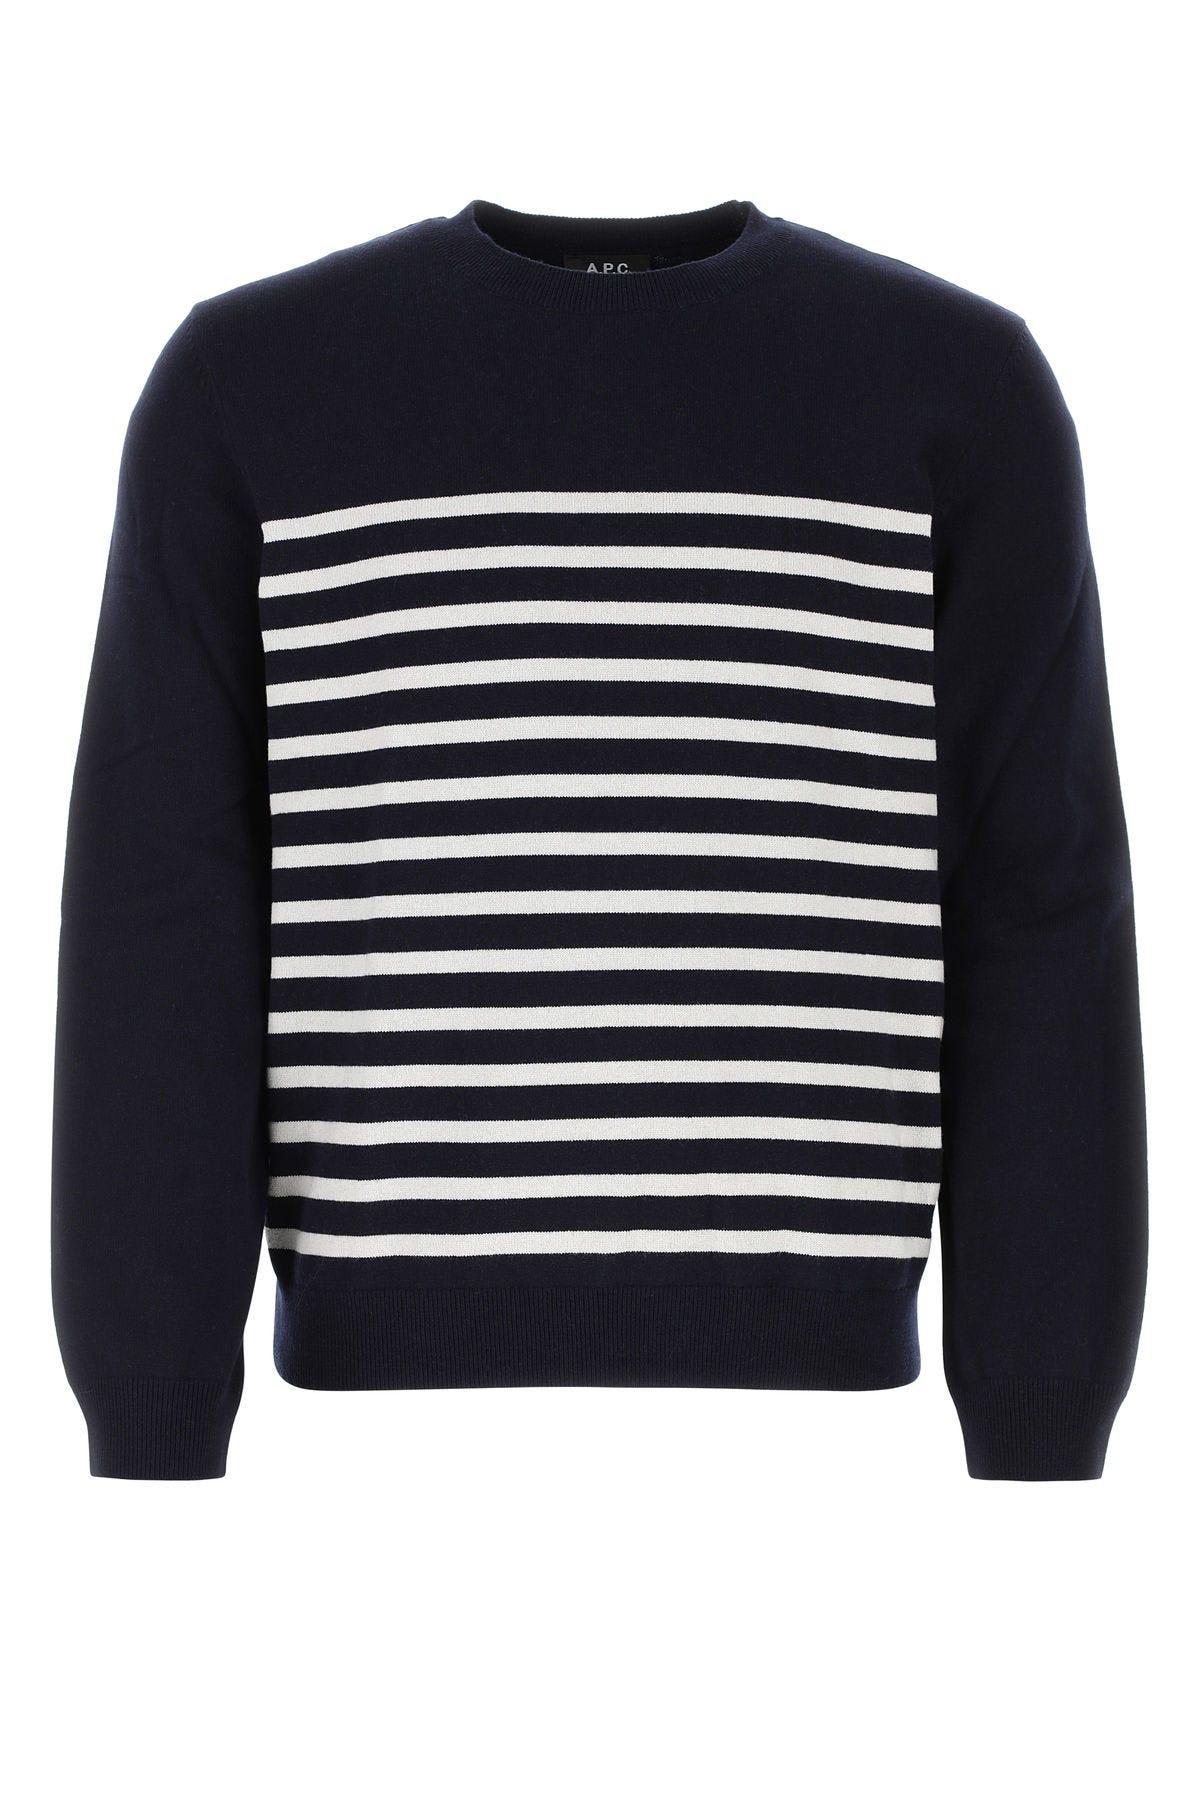 A.P.C. EMBROIDERED CASHMERE AND COTTON SWEATER 